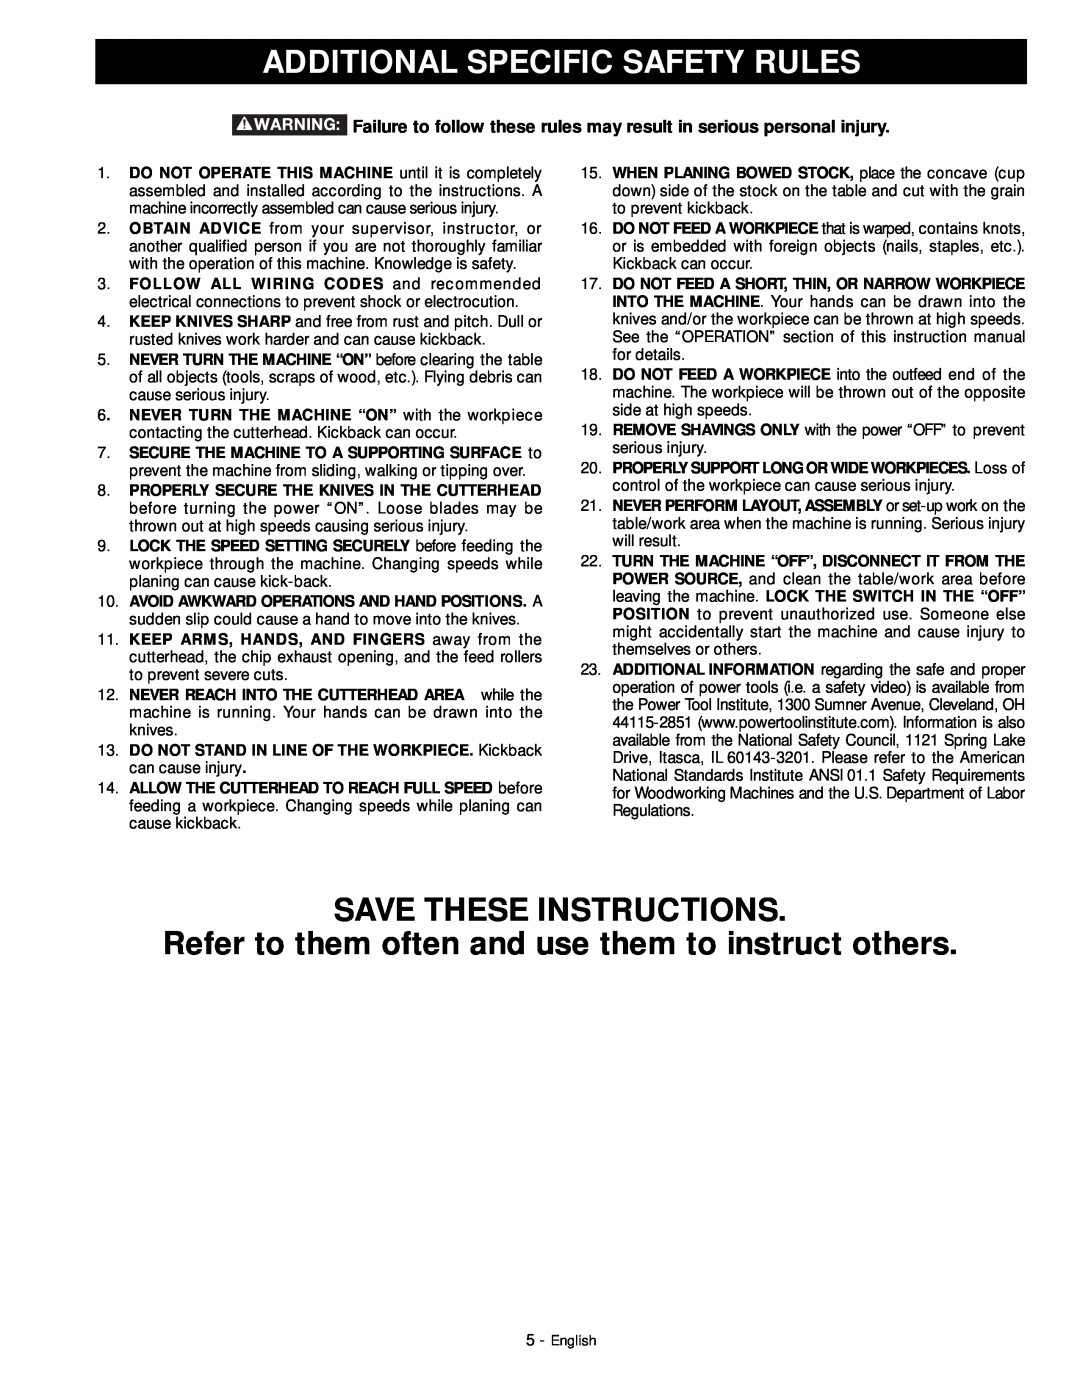 DeWalt 18657 instruction manual Additional Specific Safety Rules, Save These Instructions 